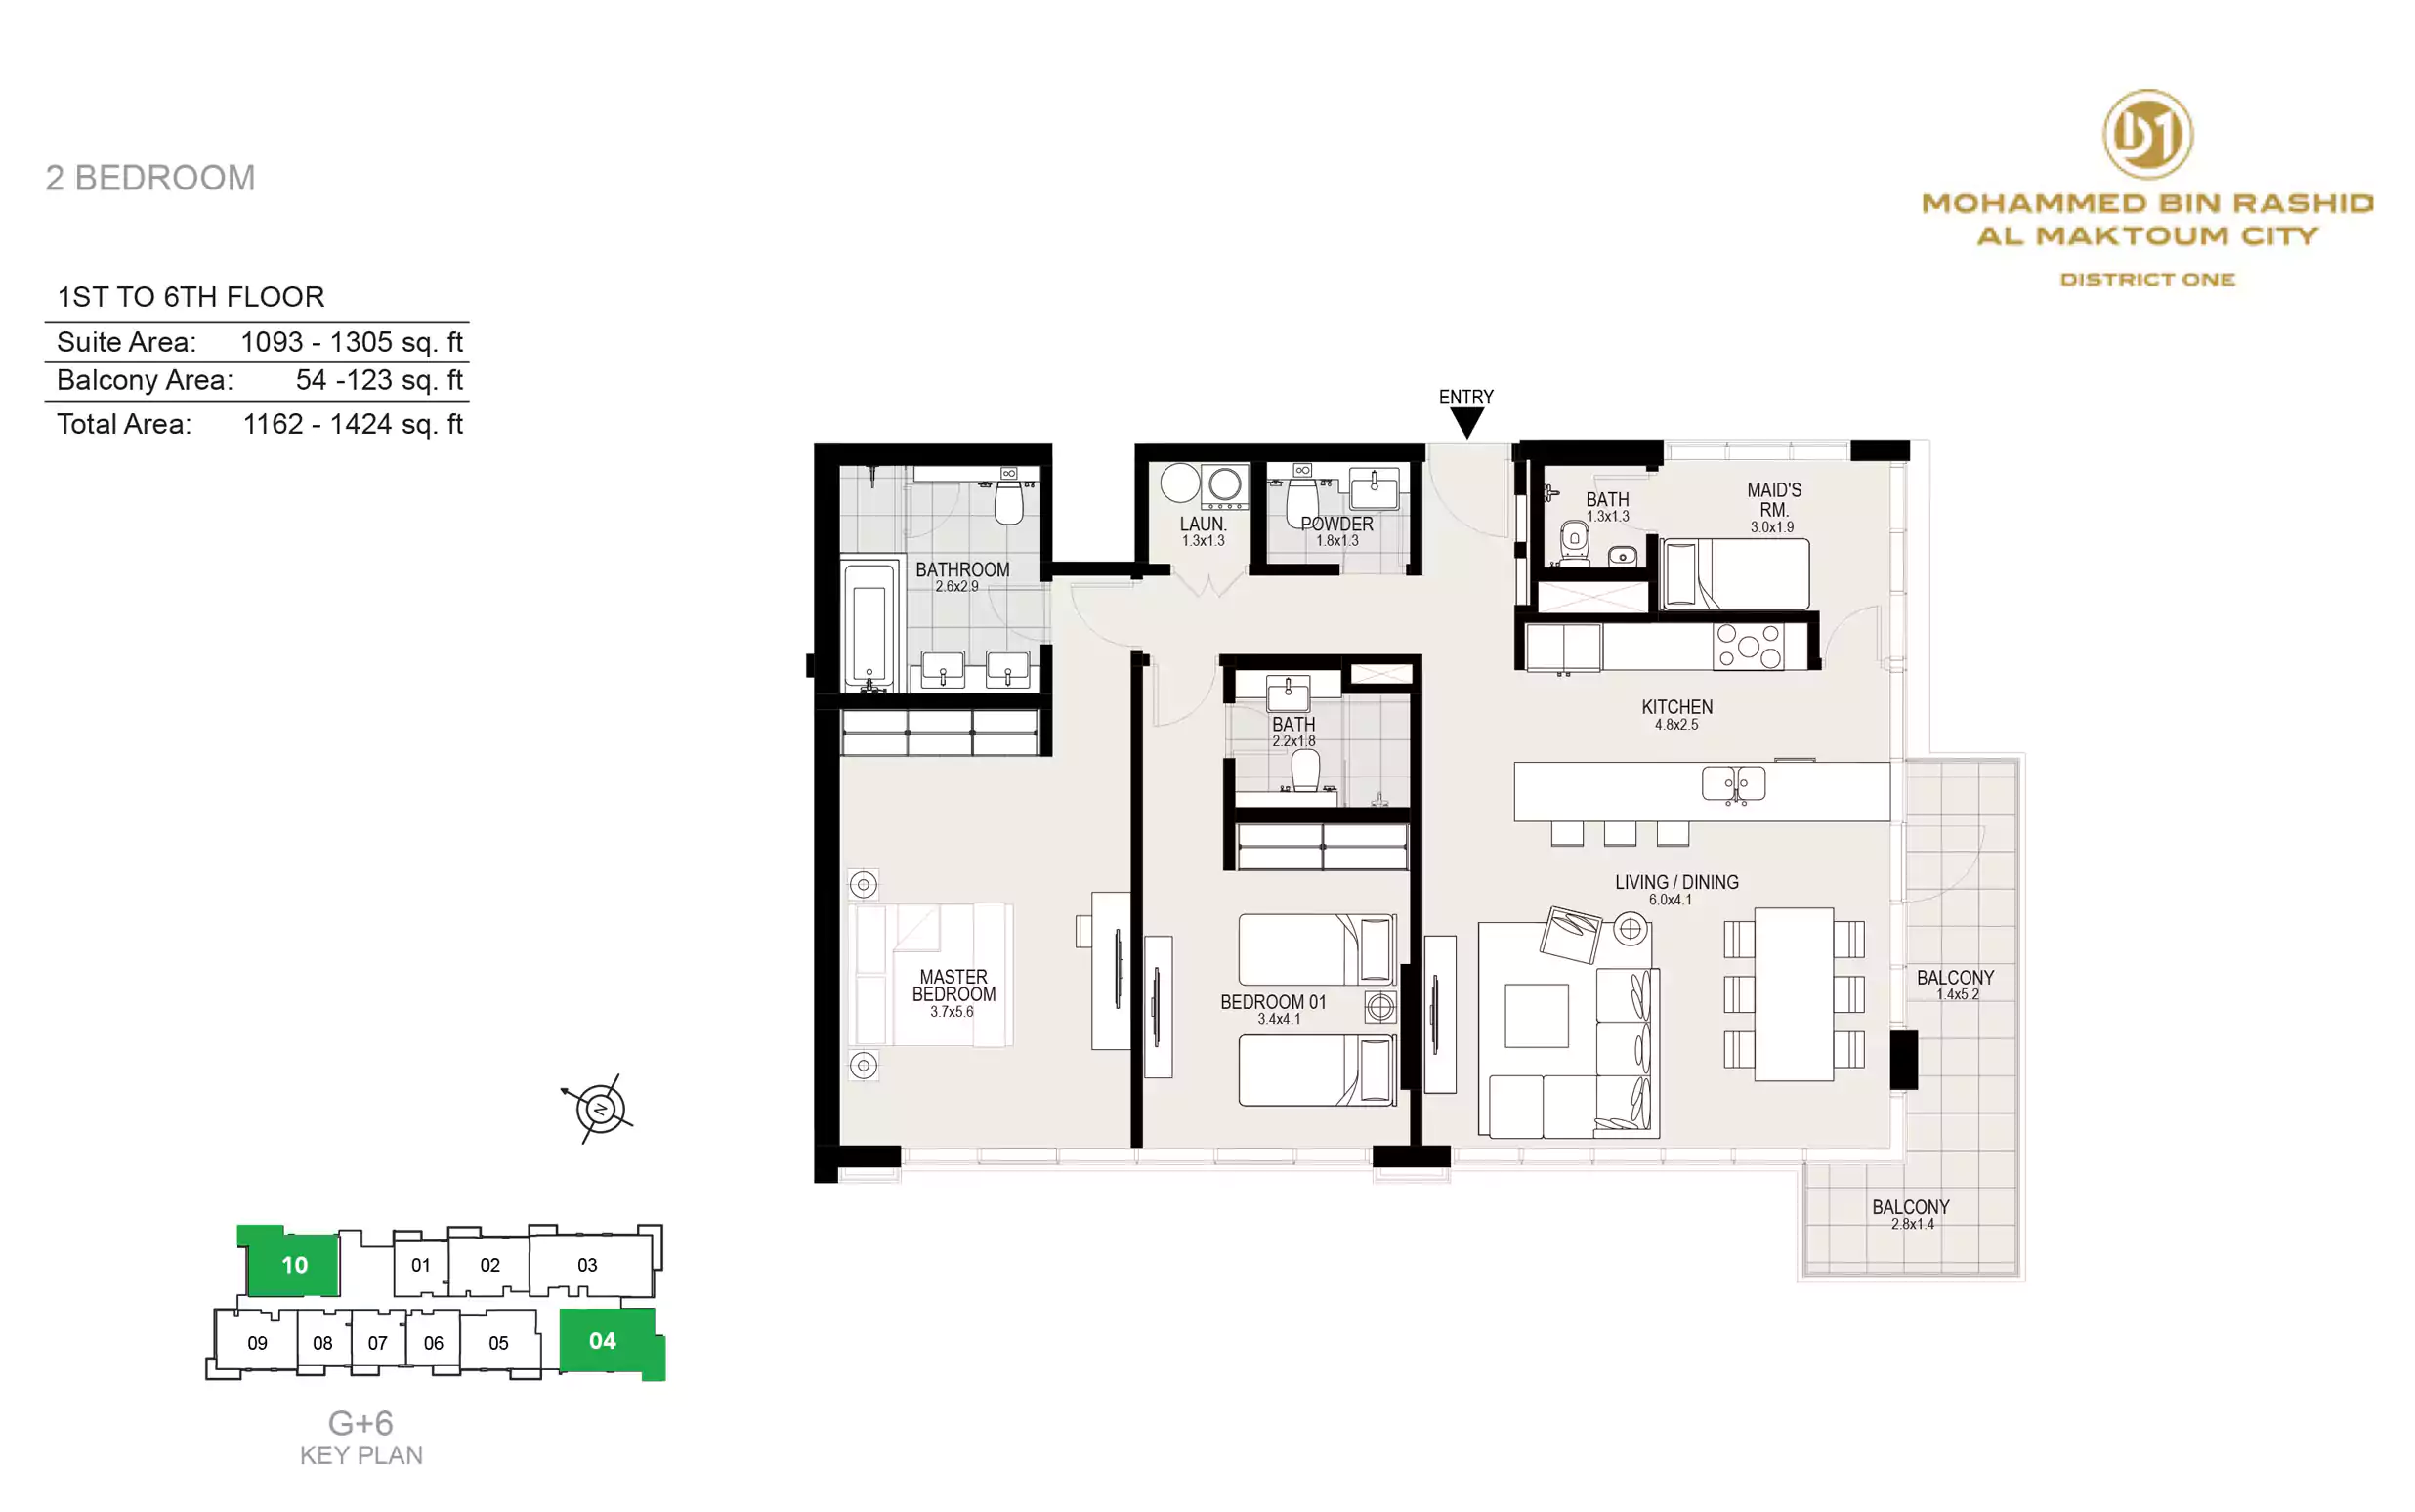 Building 6 - Total Area : 1162 - 1424 sq.ft.